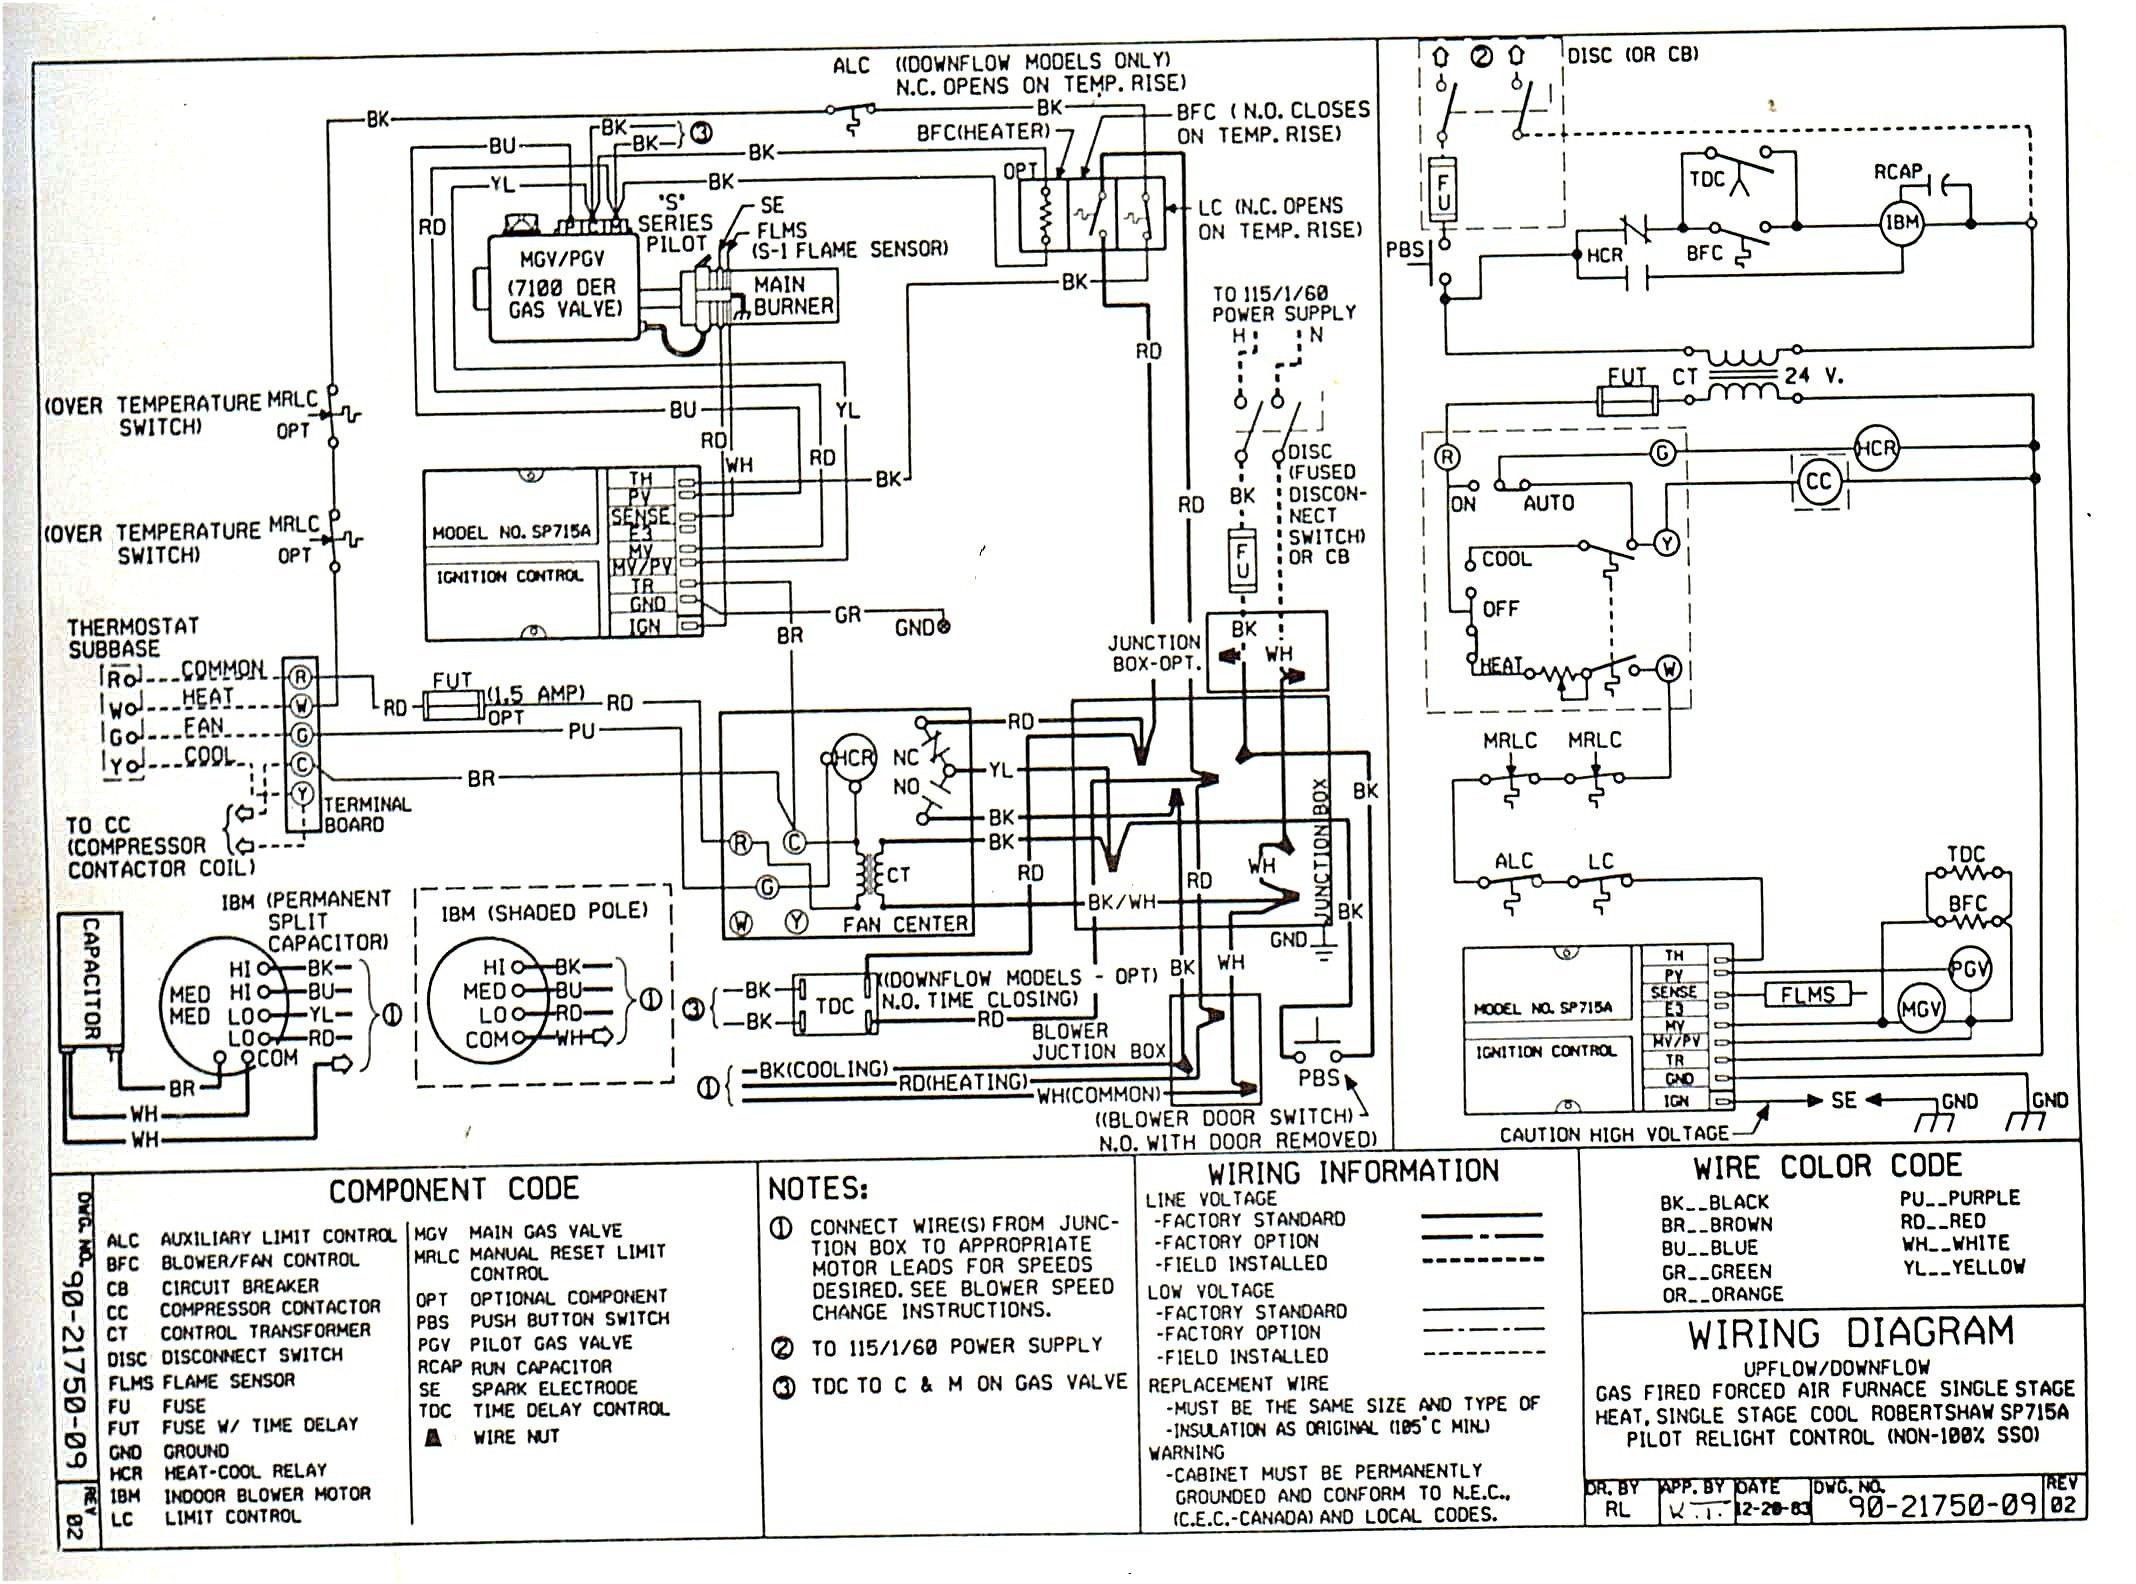 Wiring Diagram for Furnace Gas Valve New Reset Relay Wiring Diagram Refrence Payne Gas Furnace Gas